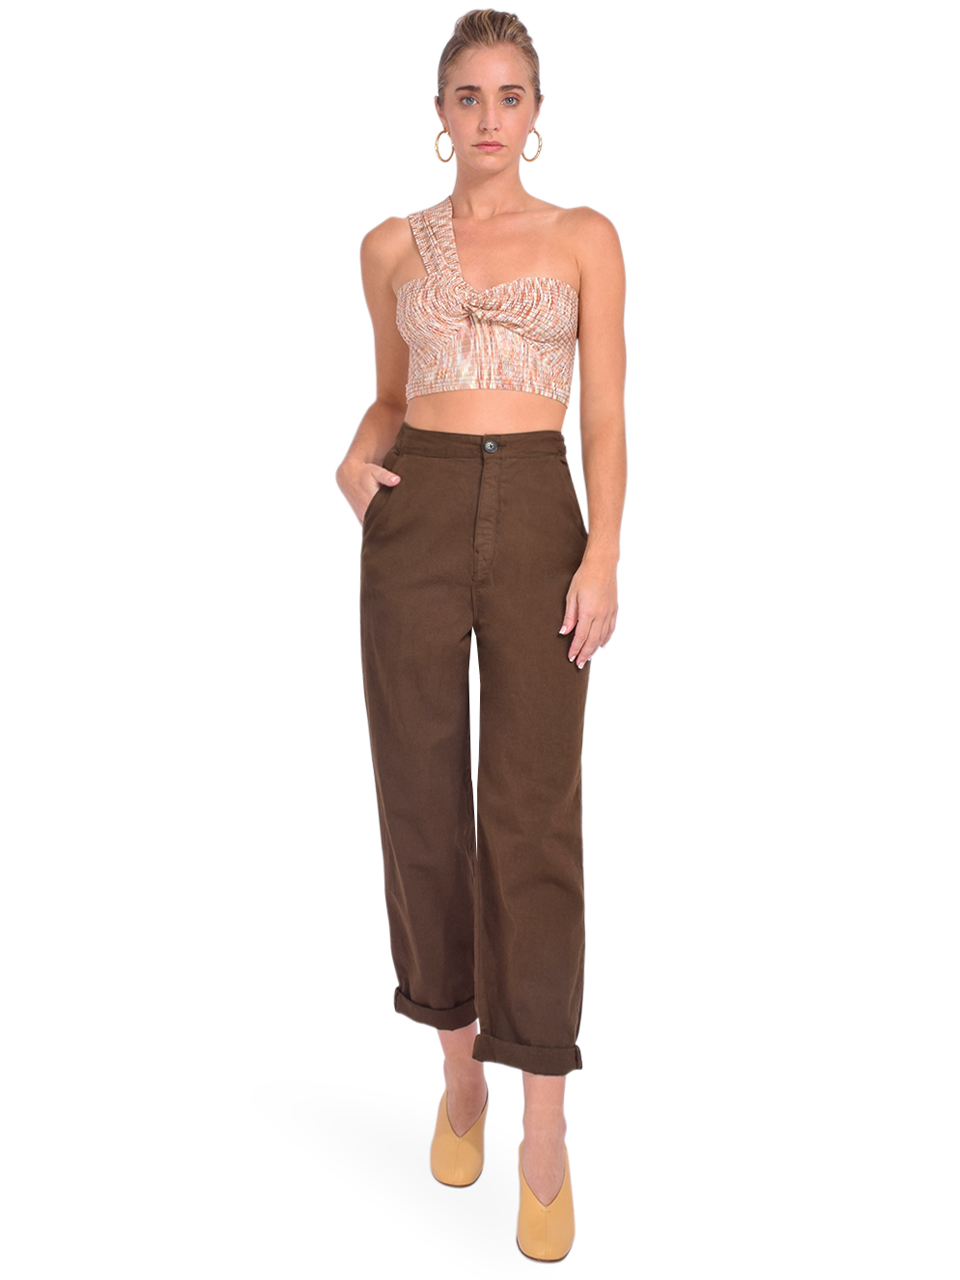 BELLEROSE Pasop Relaxed Pant in Brown Full Outfit 